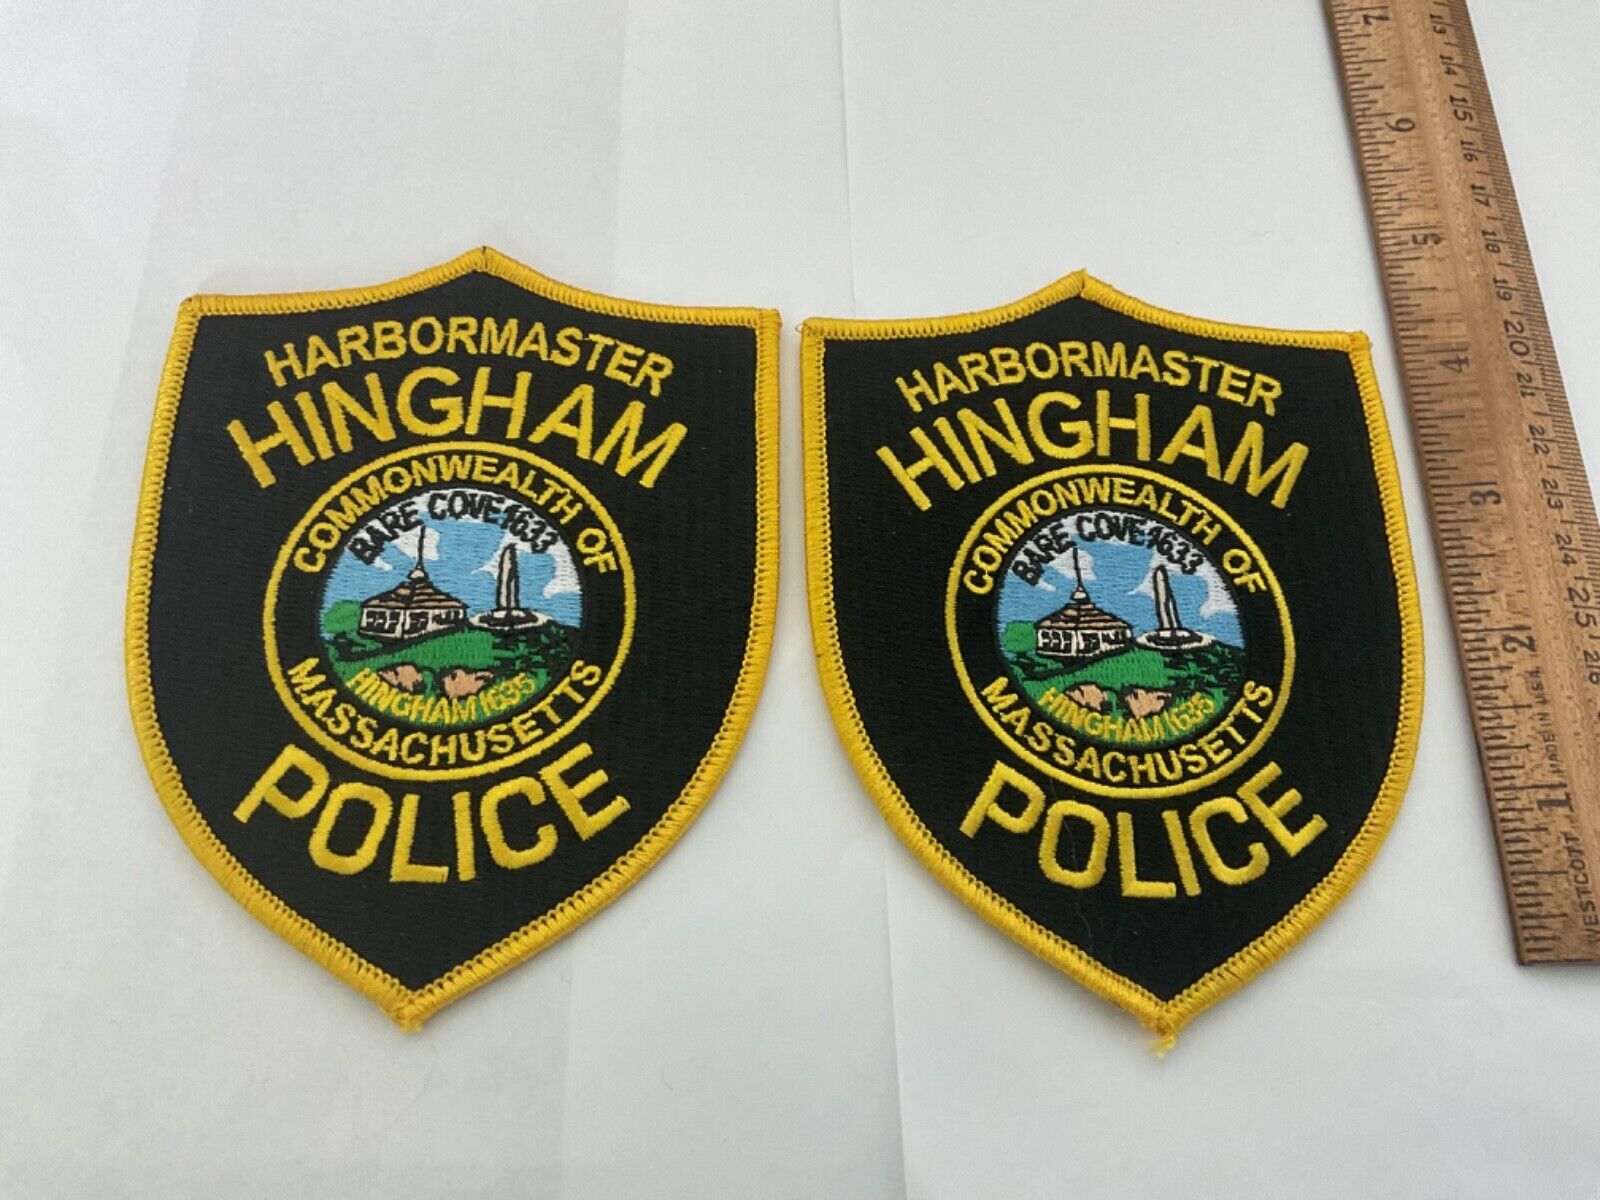 Harbormaster Police Hingham, Massachusetts Collectable  patch set 2 pieces.